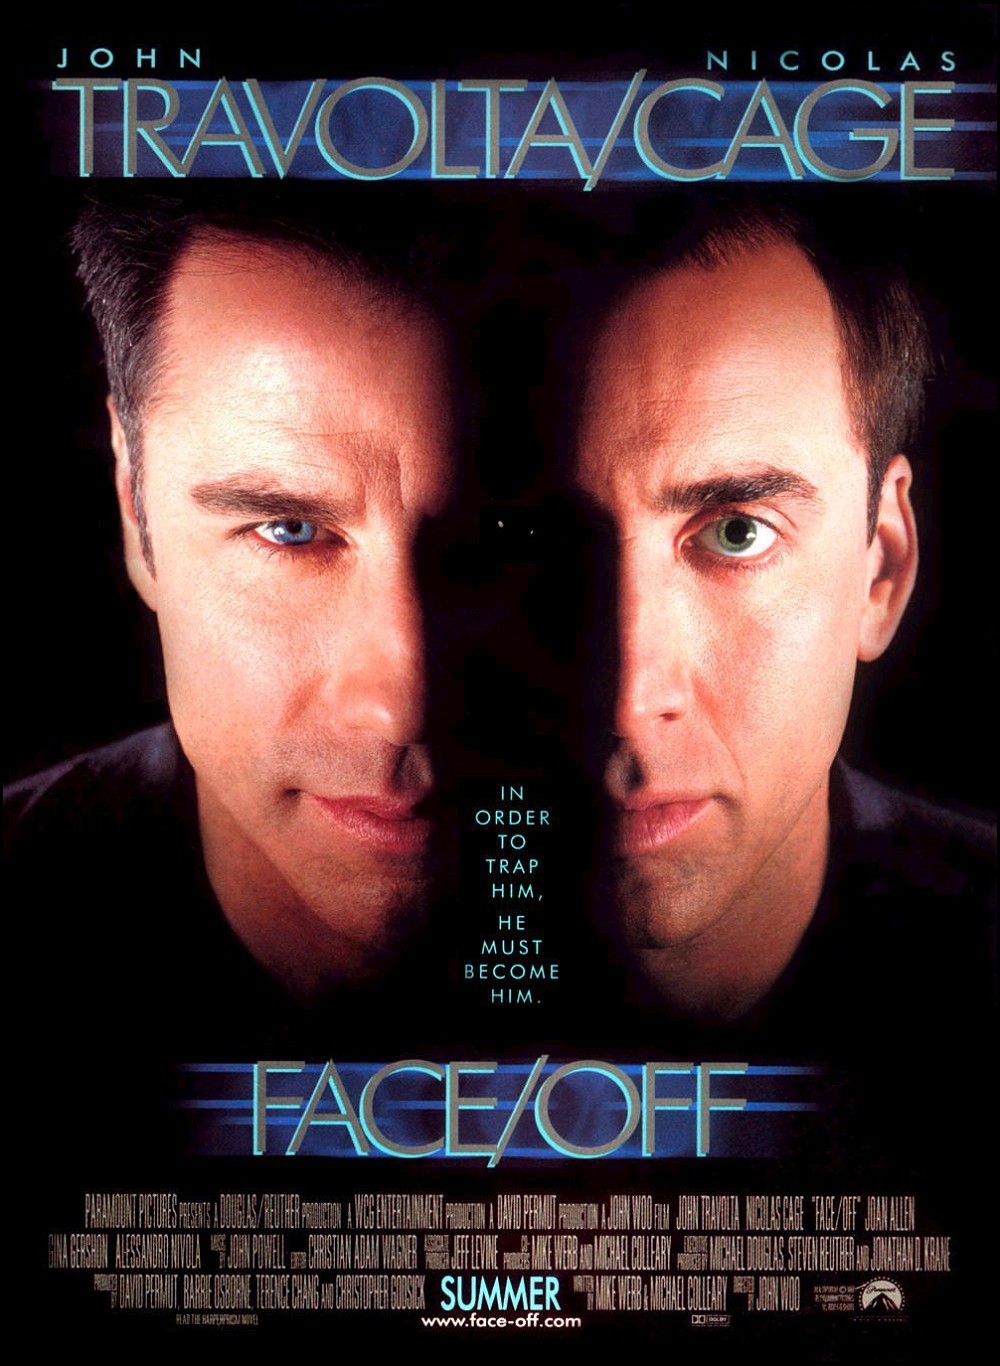 FACE / OFF